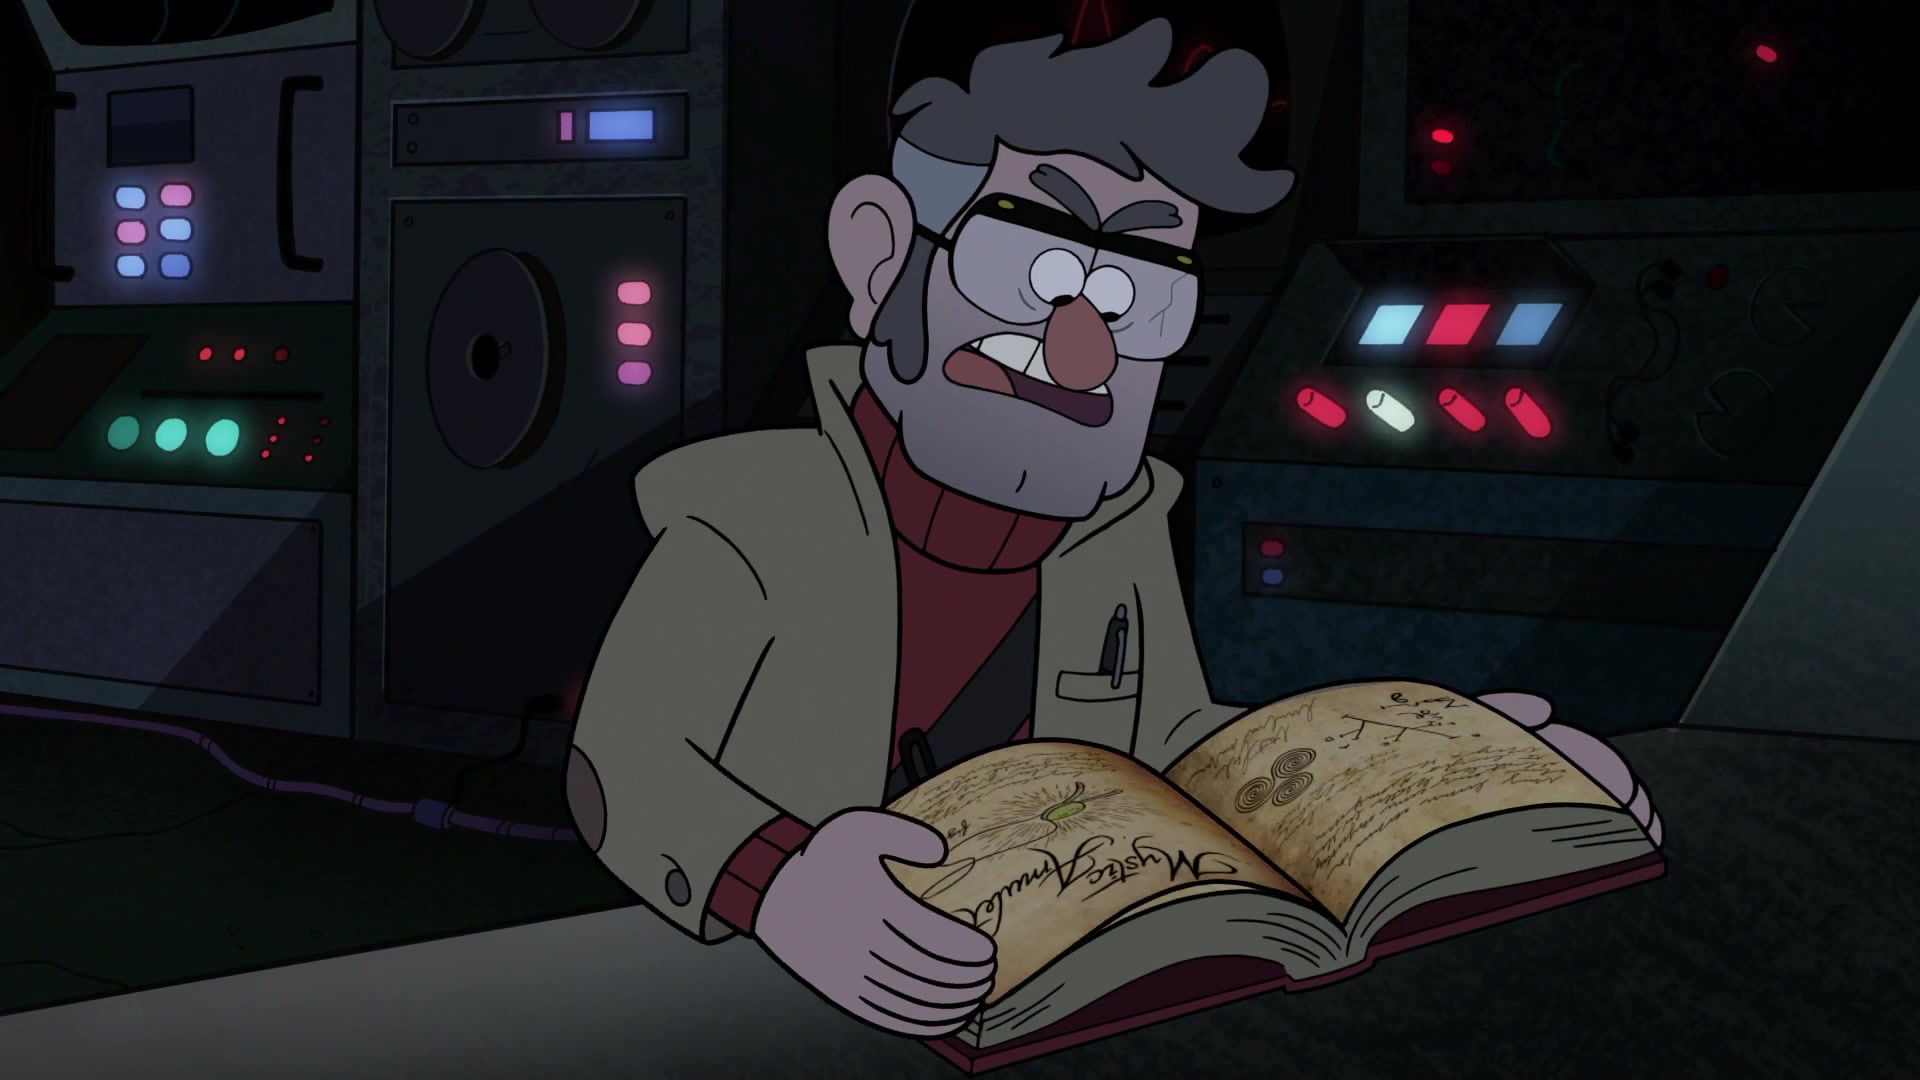 Image - S2e14 book 2 amulet page.jpg | Gravity Falls Wiki | FANDOM powered by Wikia1920 x 1080